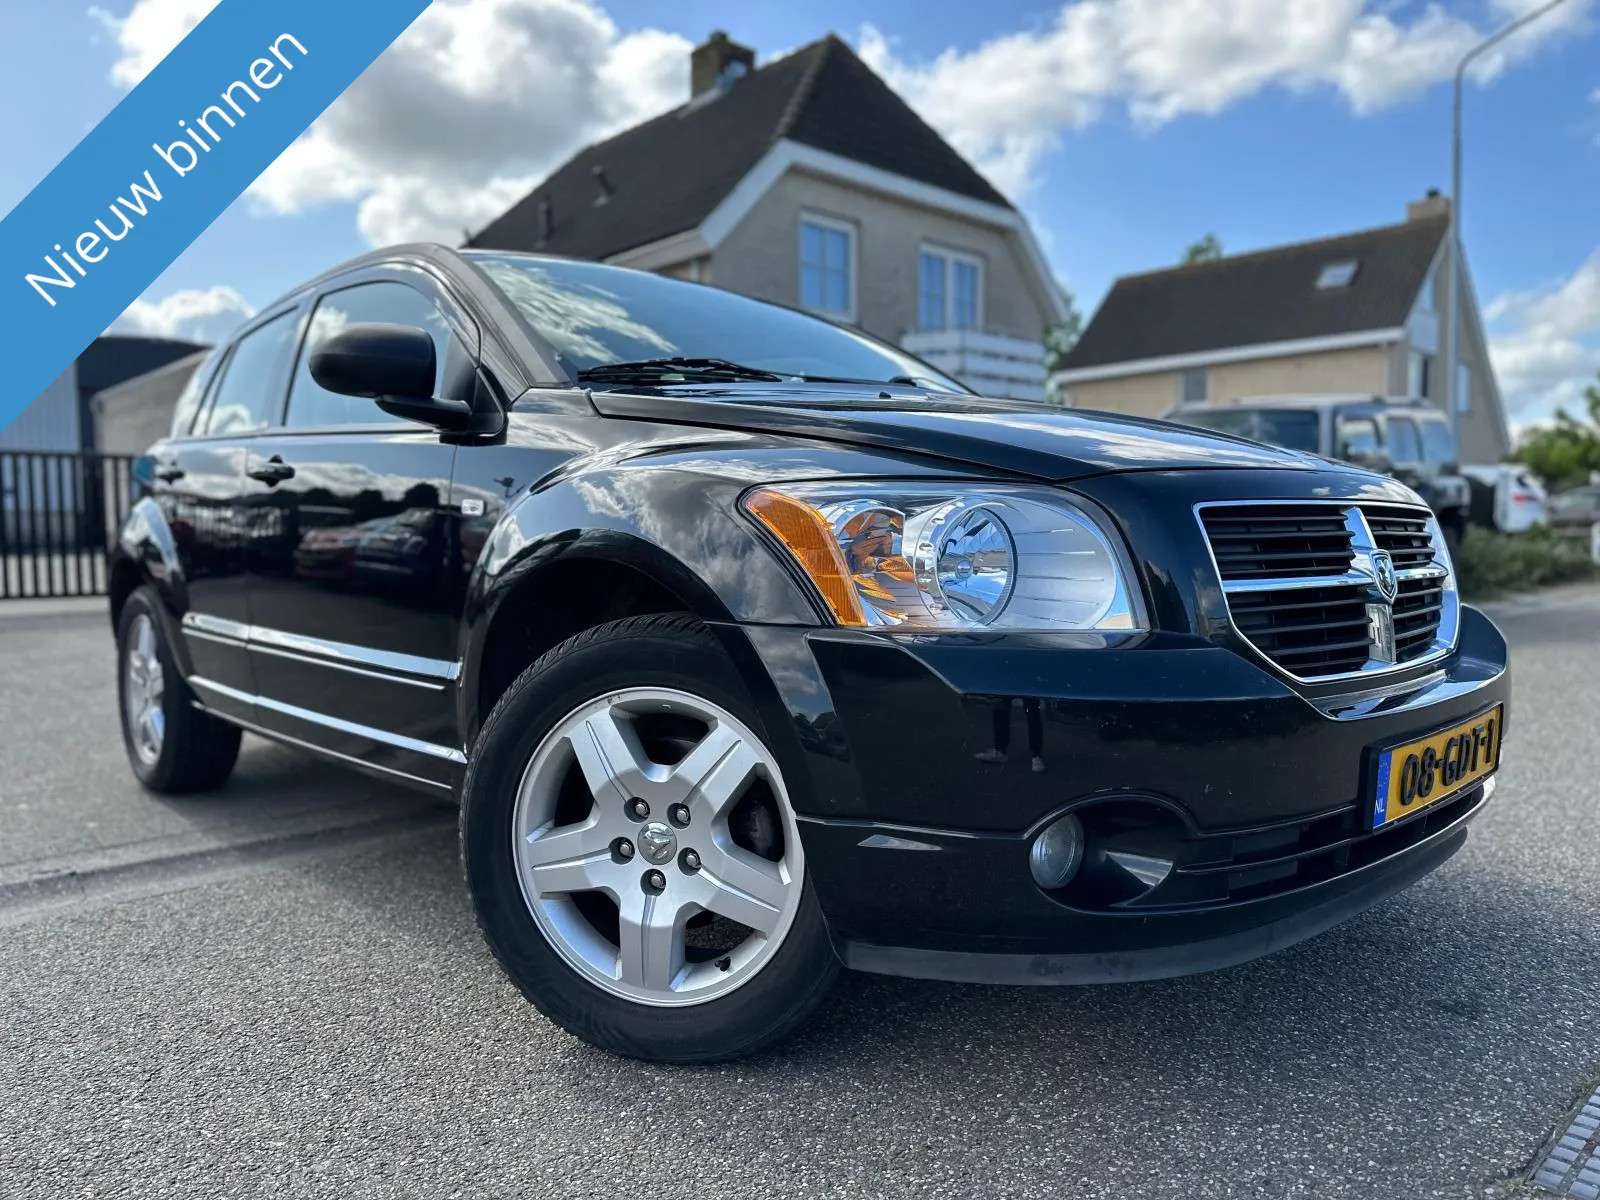 Dodge Caliber Compact in Black used in ZEVENBERGEN for € 3,999.-